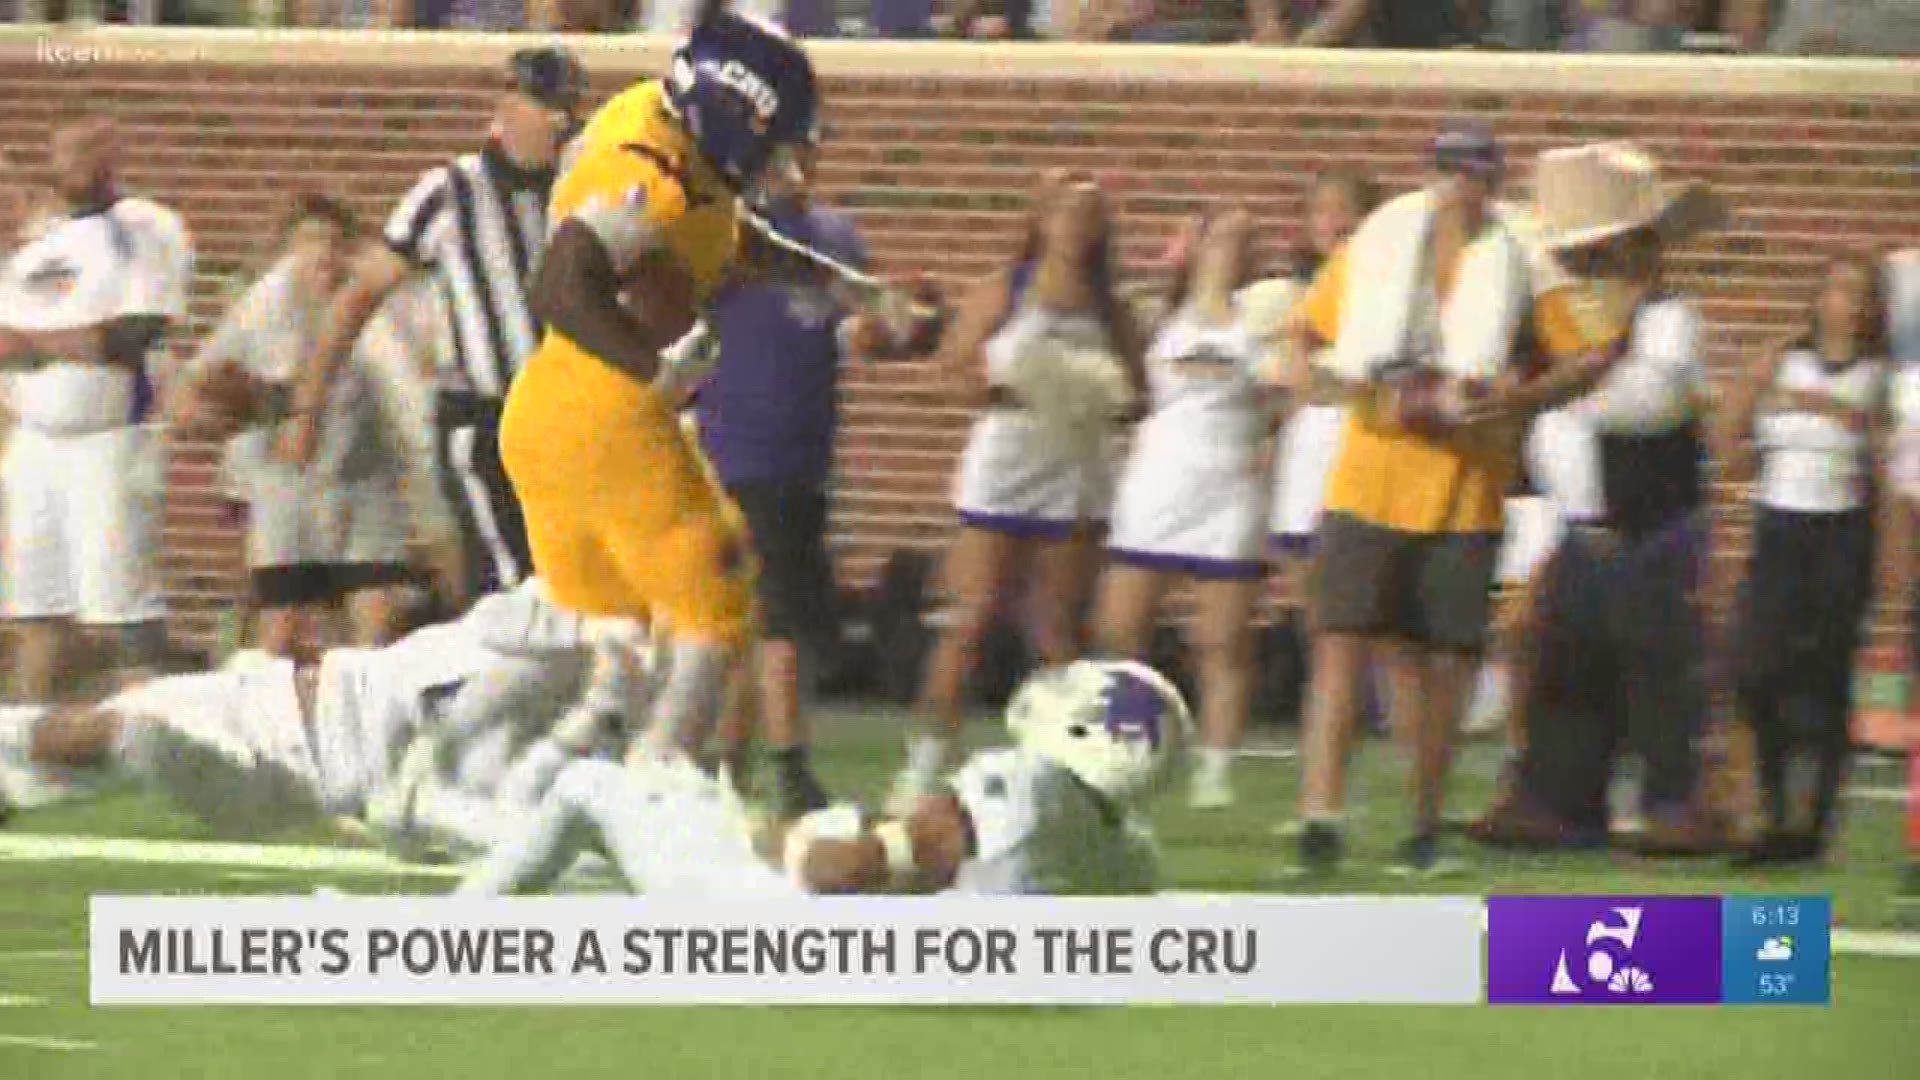 Mount Union head coach Vince Kehres said although Miller is UMHB's top weapon, his defense will have to prepare for the Cru's offensive unit as a whole.